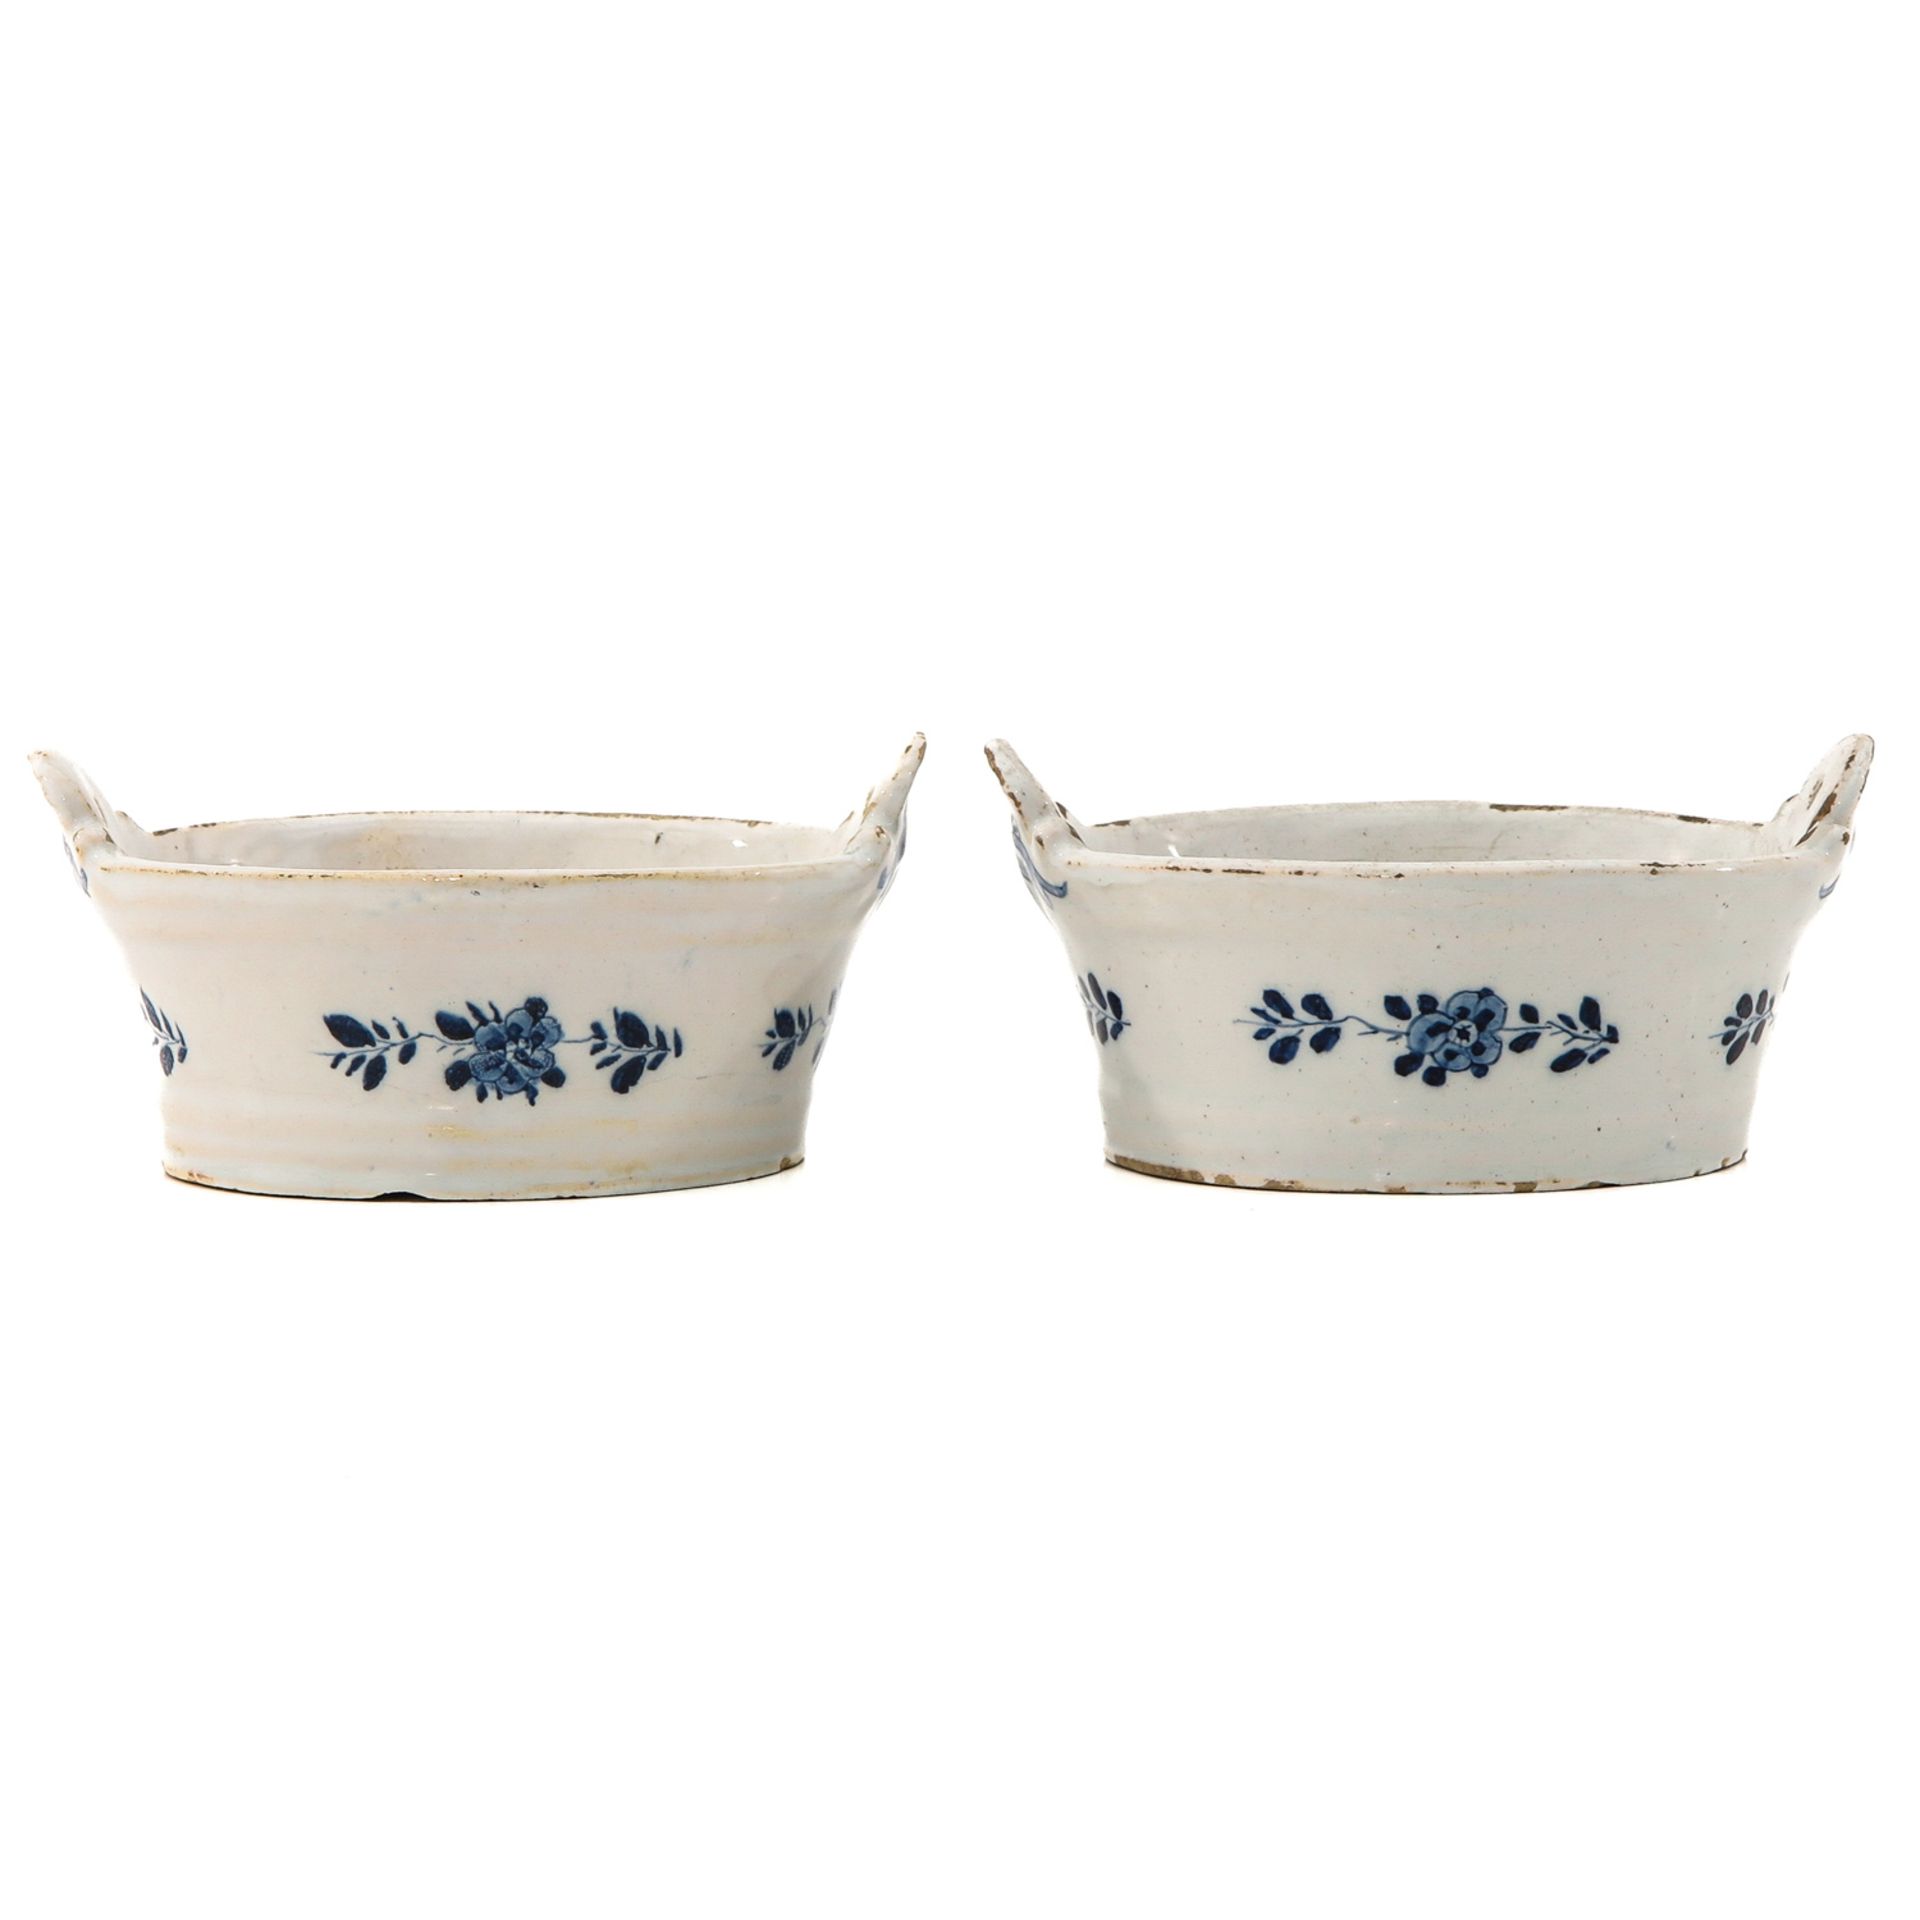 A Pair of Delft 18th Century Butter Dishes